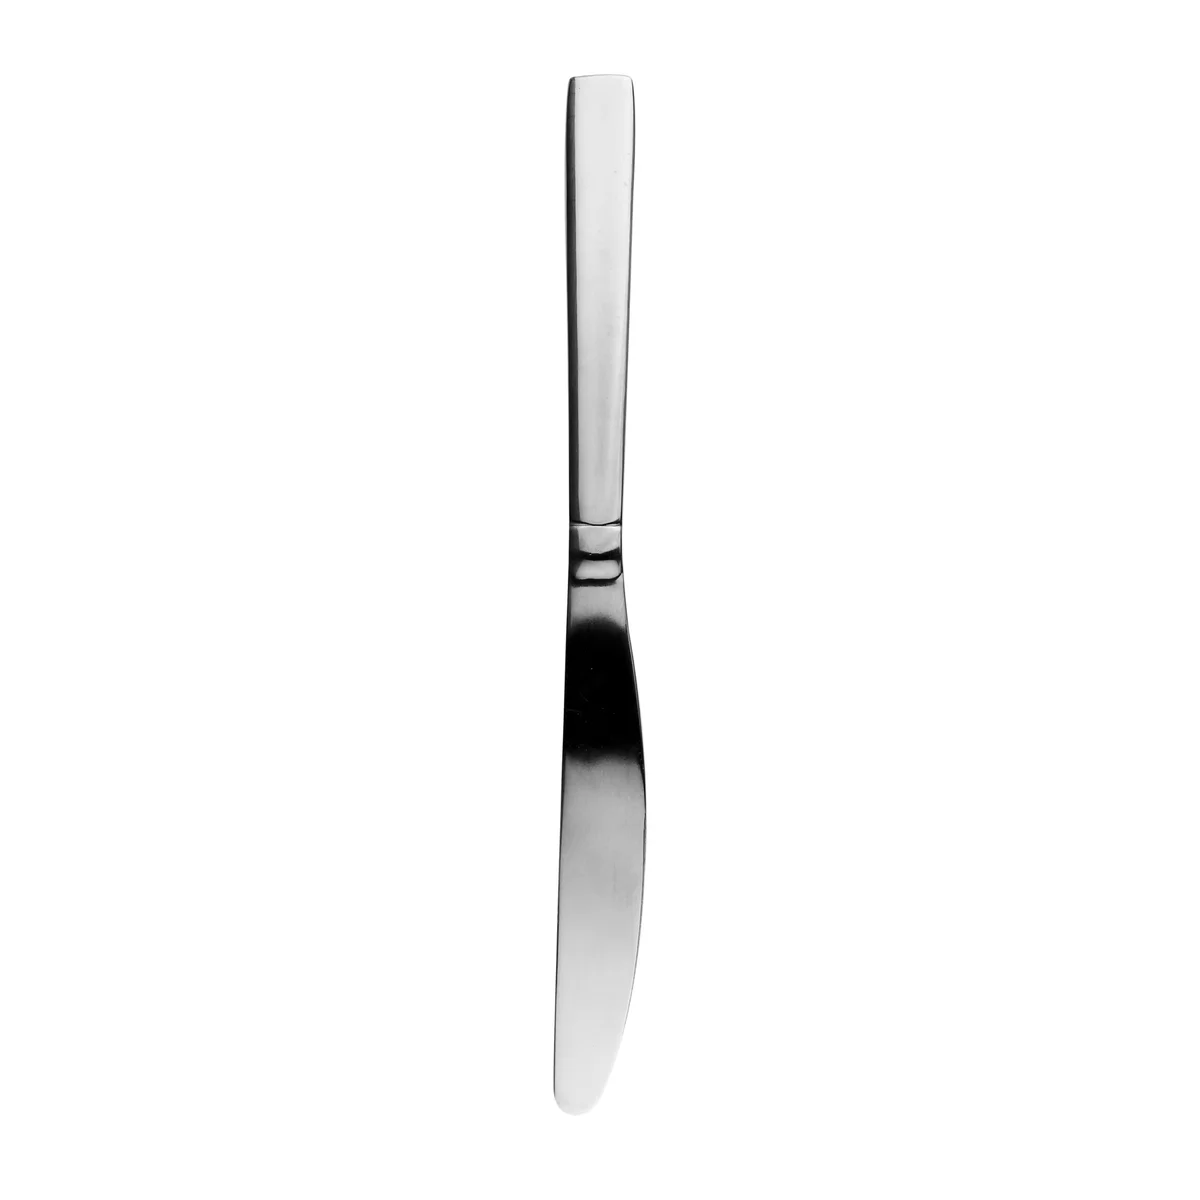 40-Piece Silverware Set With Steak Knives - 3 Designs! – Tuesday Morning